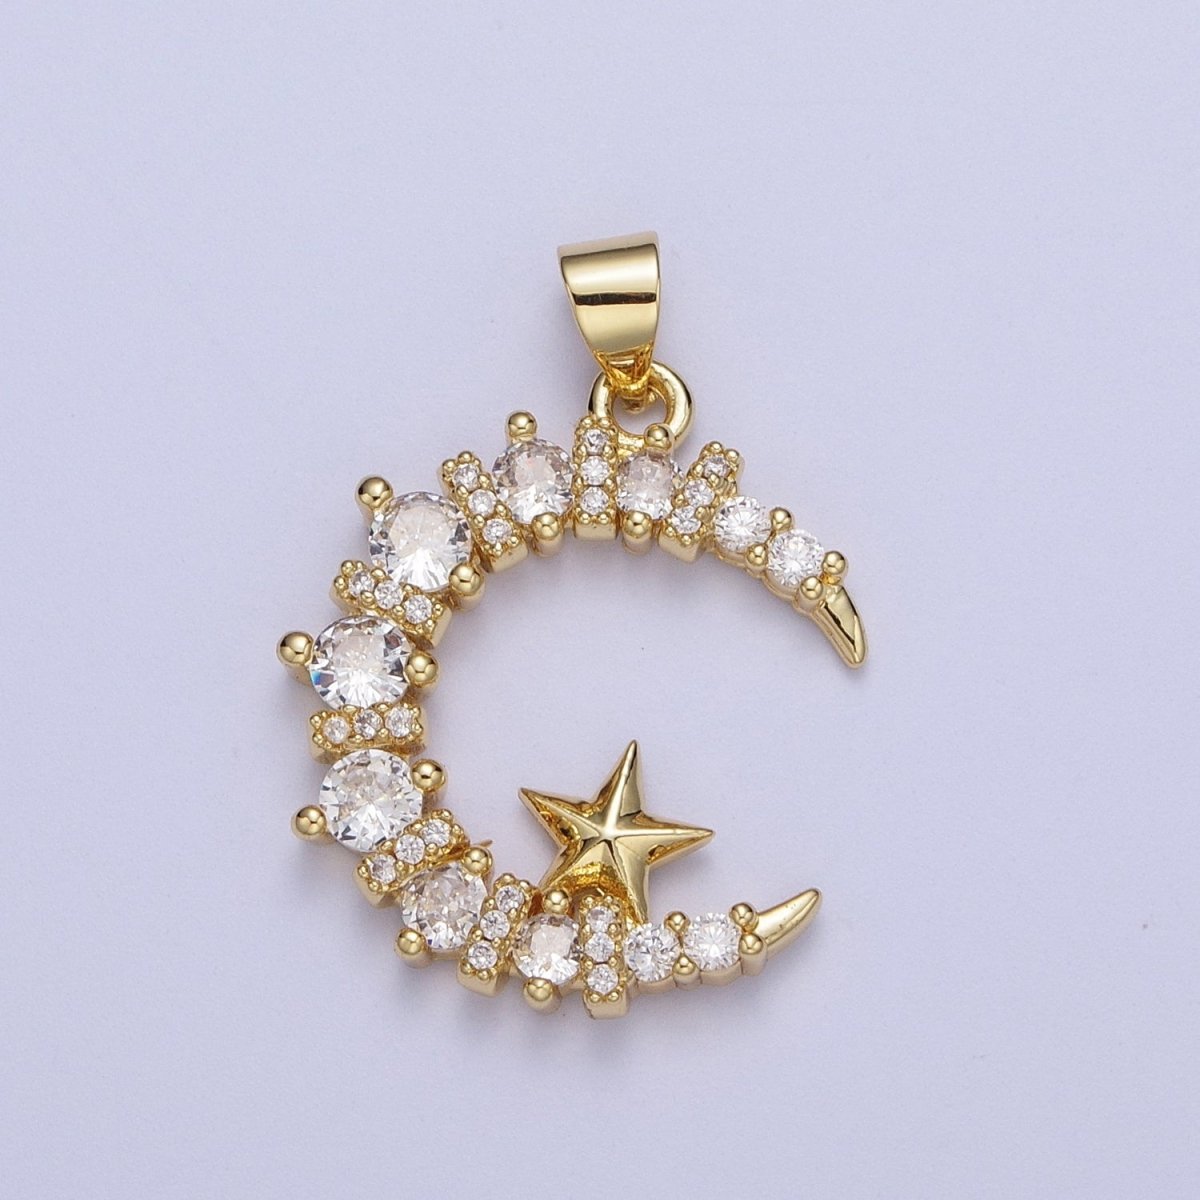 Dainty Crescent Moon Charm with Clear Cz Stone for Moon Star Pendant Celestial Jewelry X-533 - DLUXCA